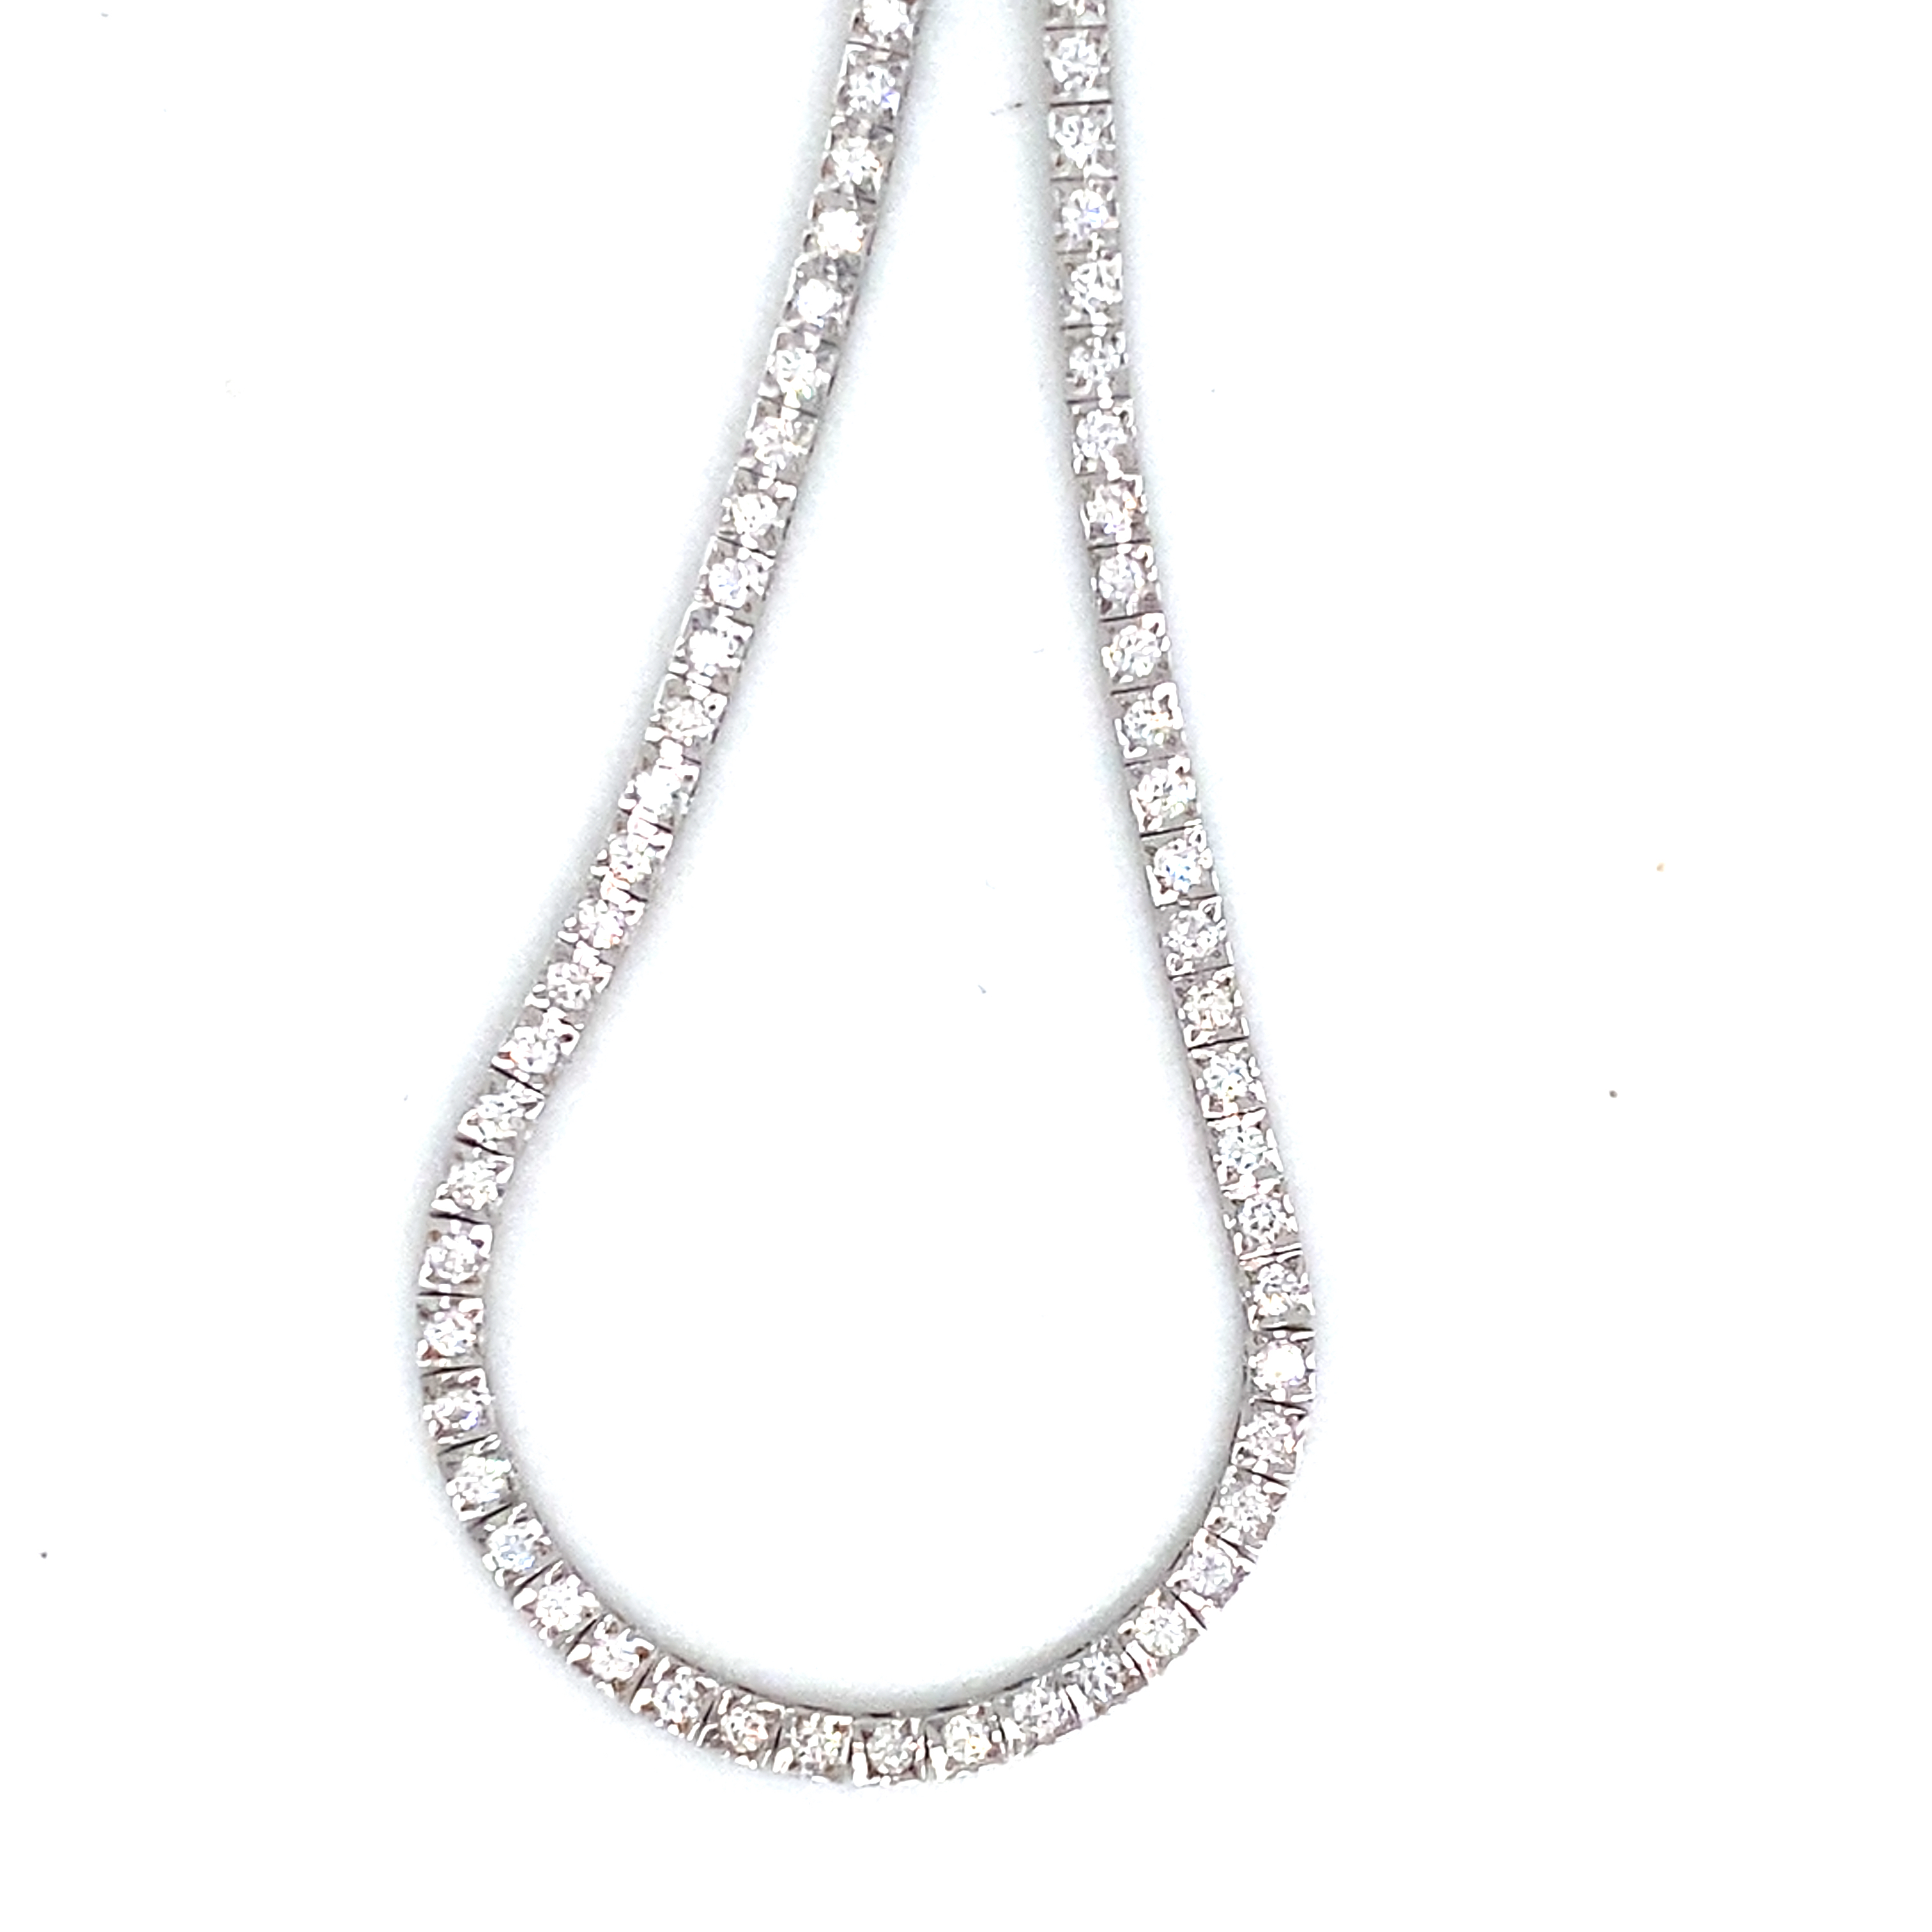 An 18 Carat White Gold and Diamond Line Necklace - 3.65 Carats